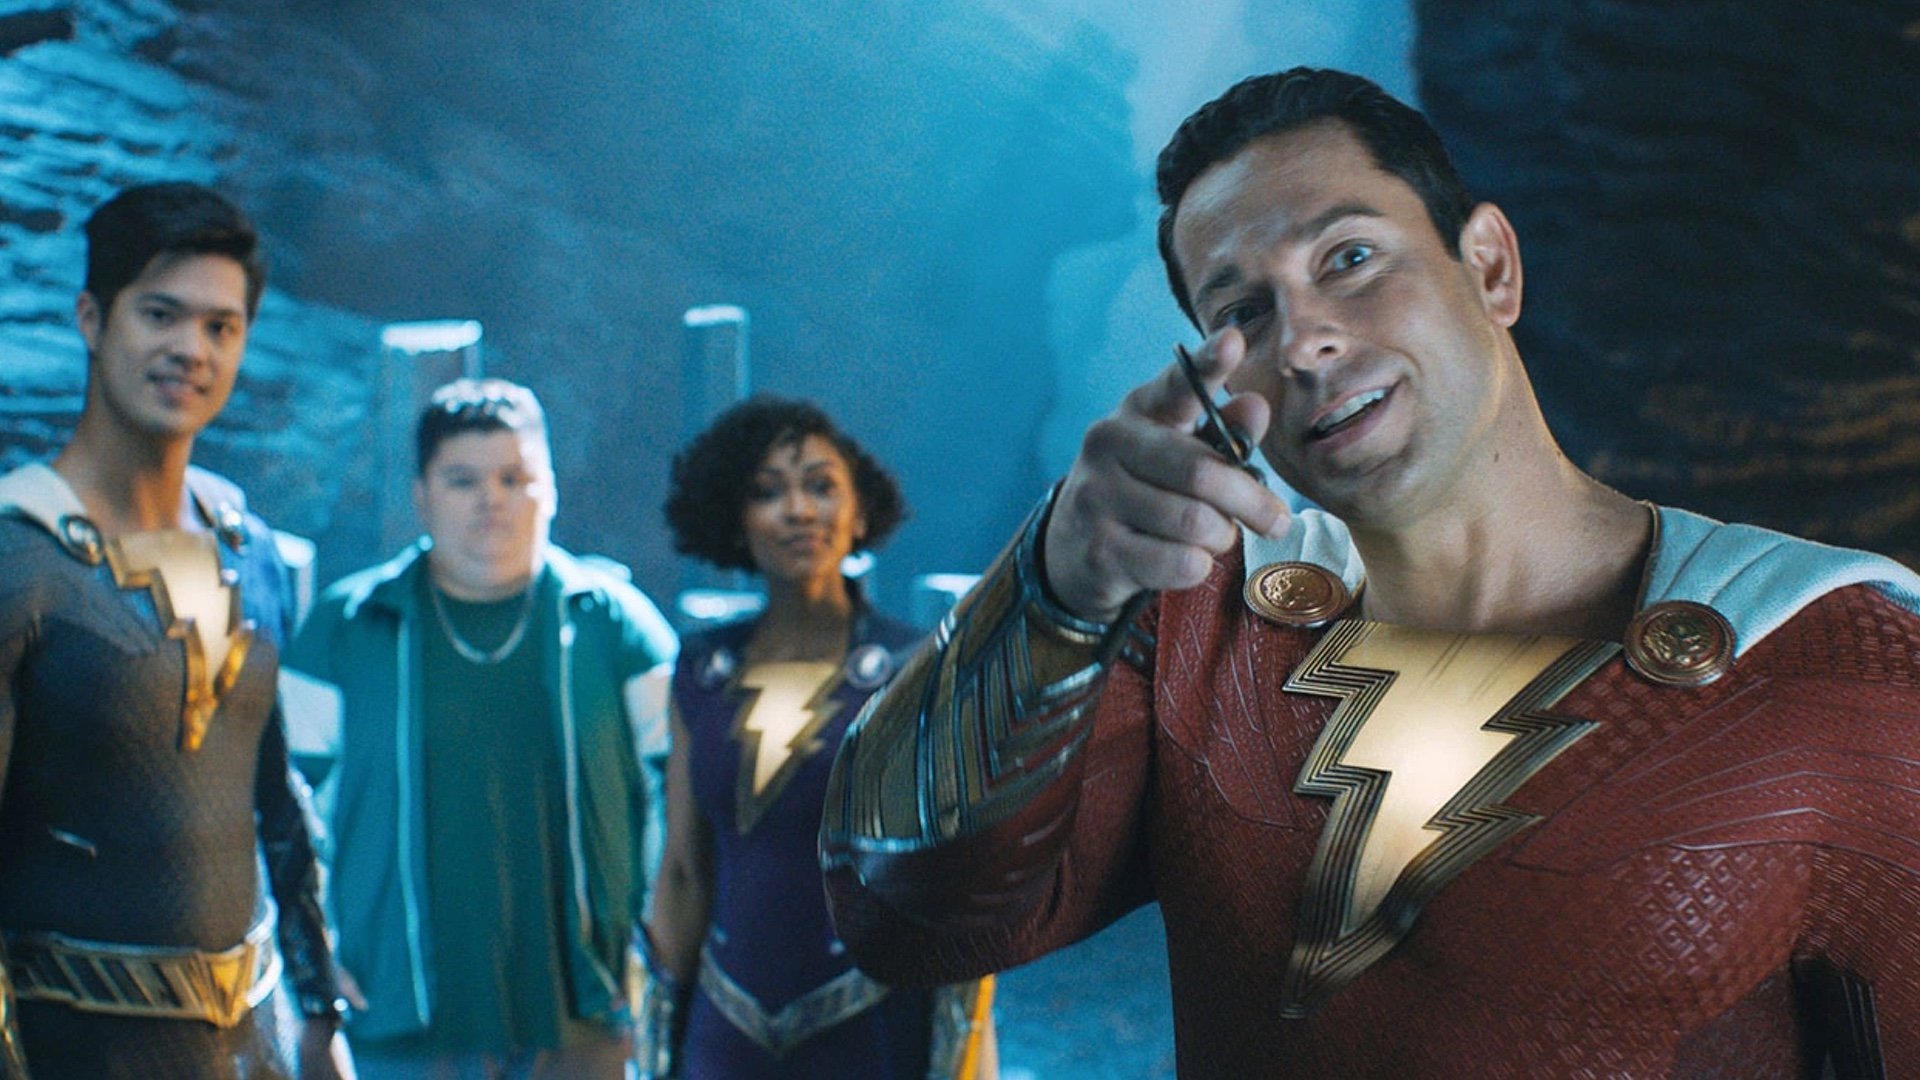 Damn! Shazam Fury of The Gods worldwide opening weekend box office earnings  couldn't even surpass Morbius opening weekend. : r/DC_Cinematic